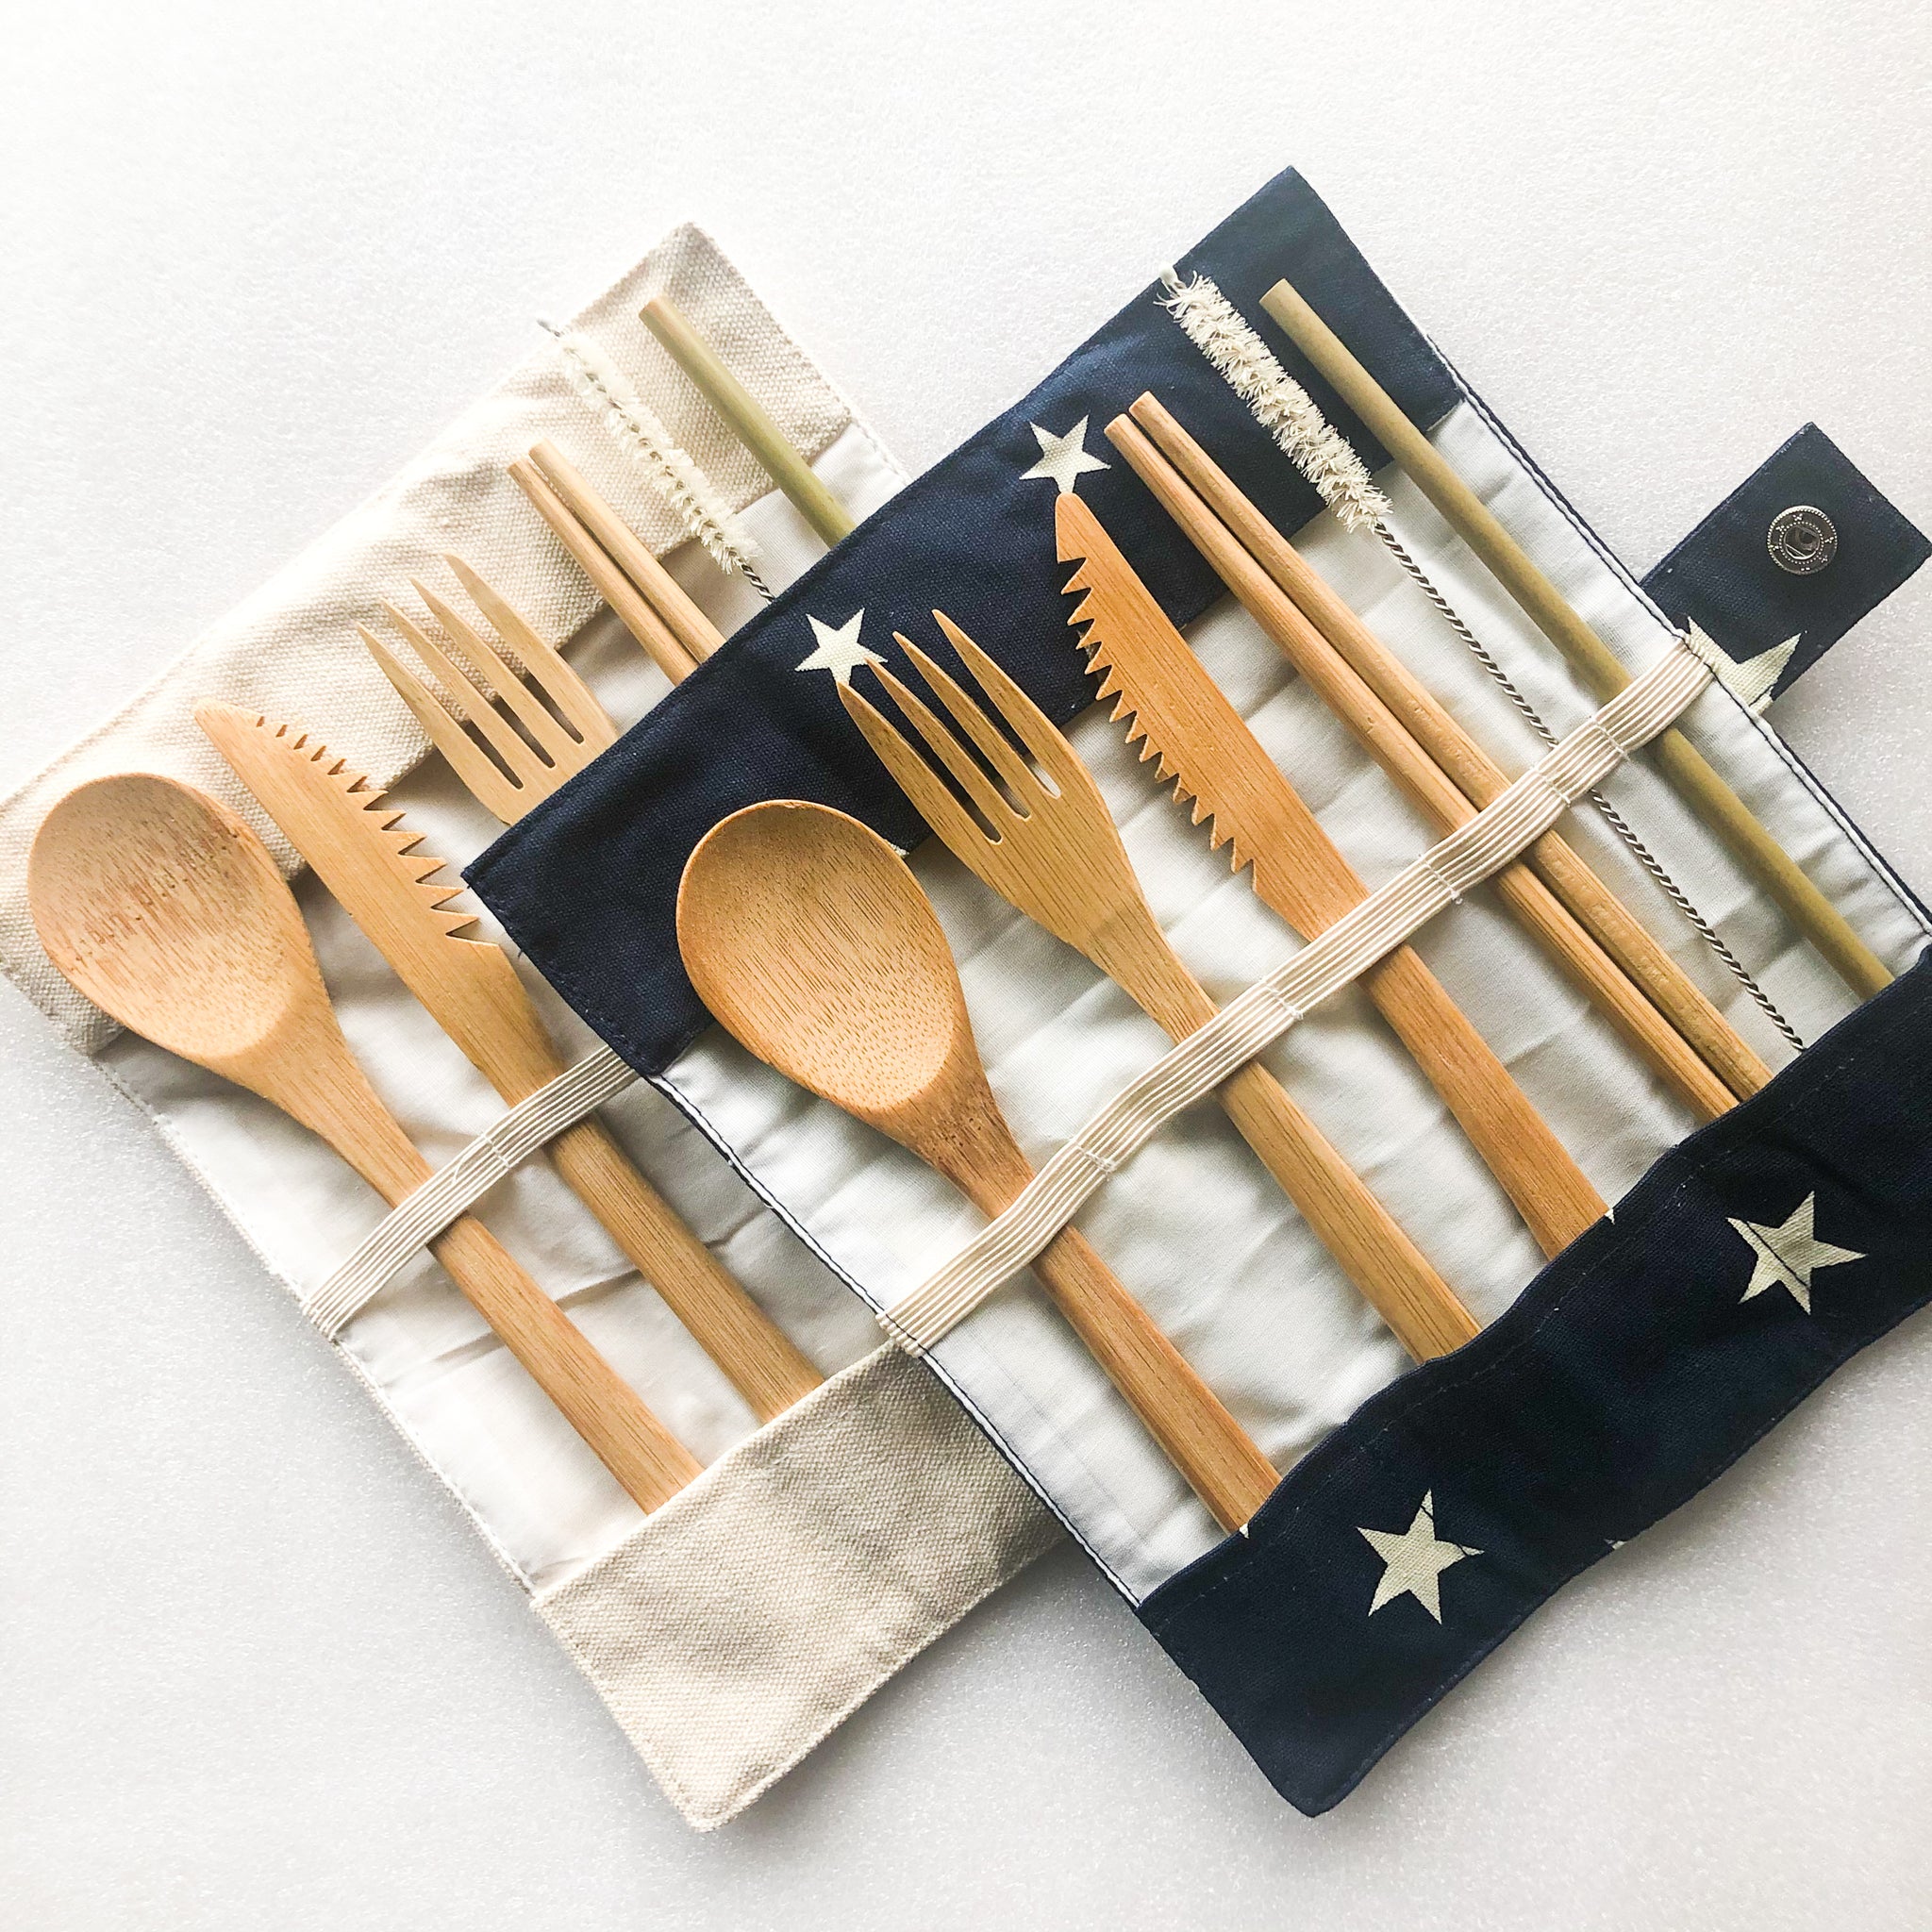 Hommaly Portable Flatware Set Review: Reduce Waste Easily